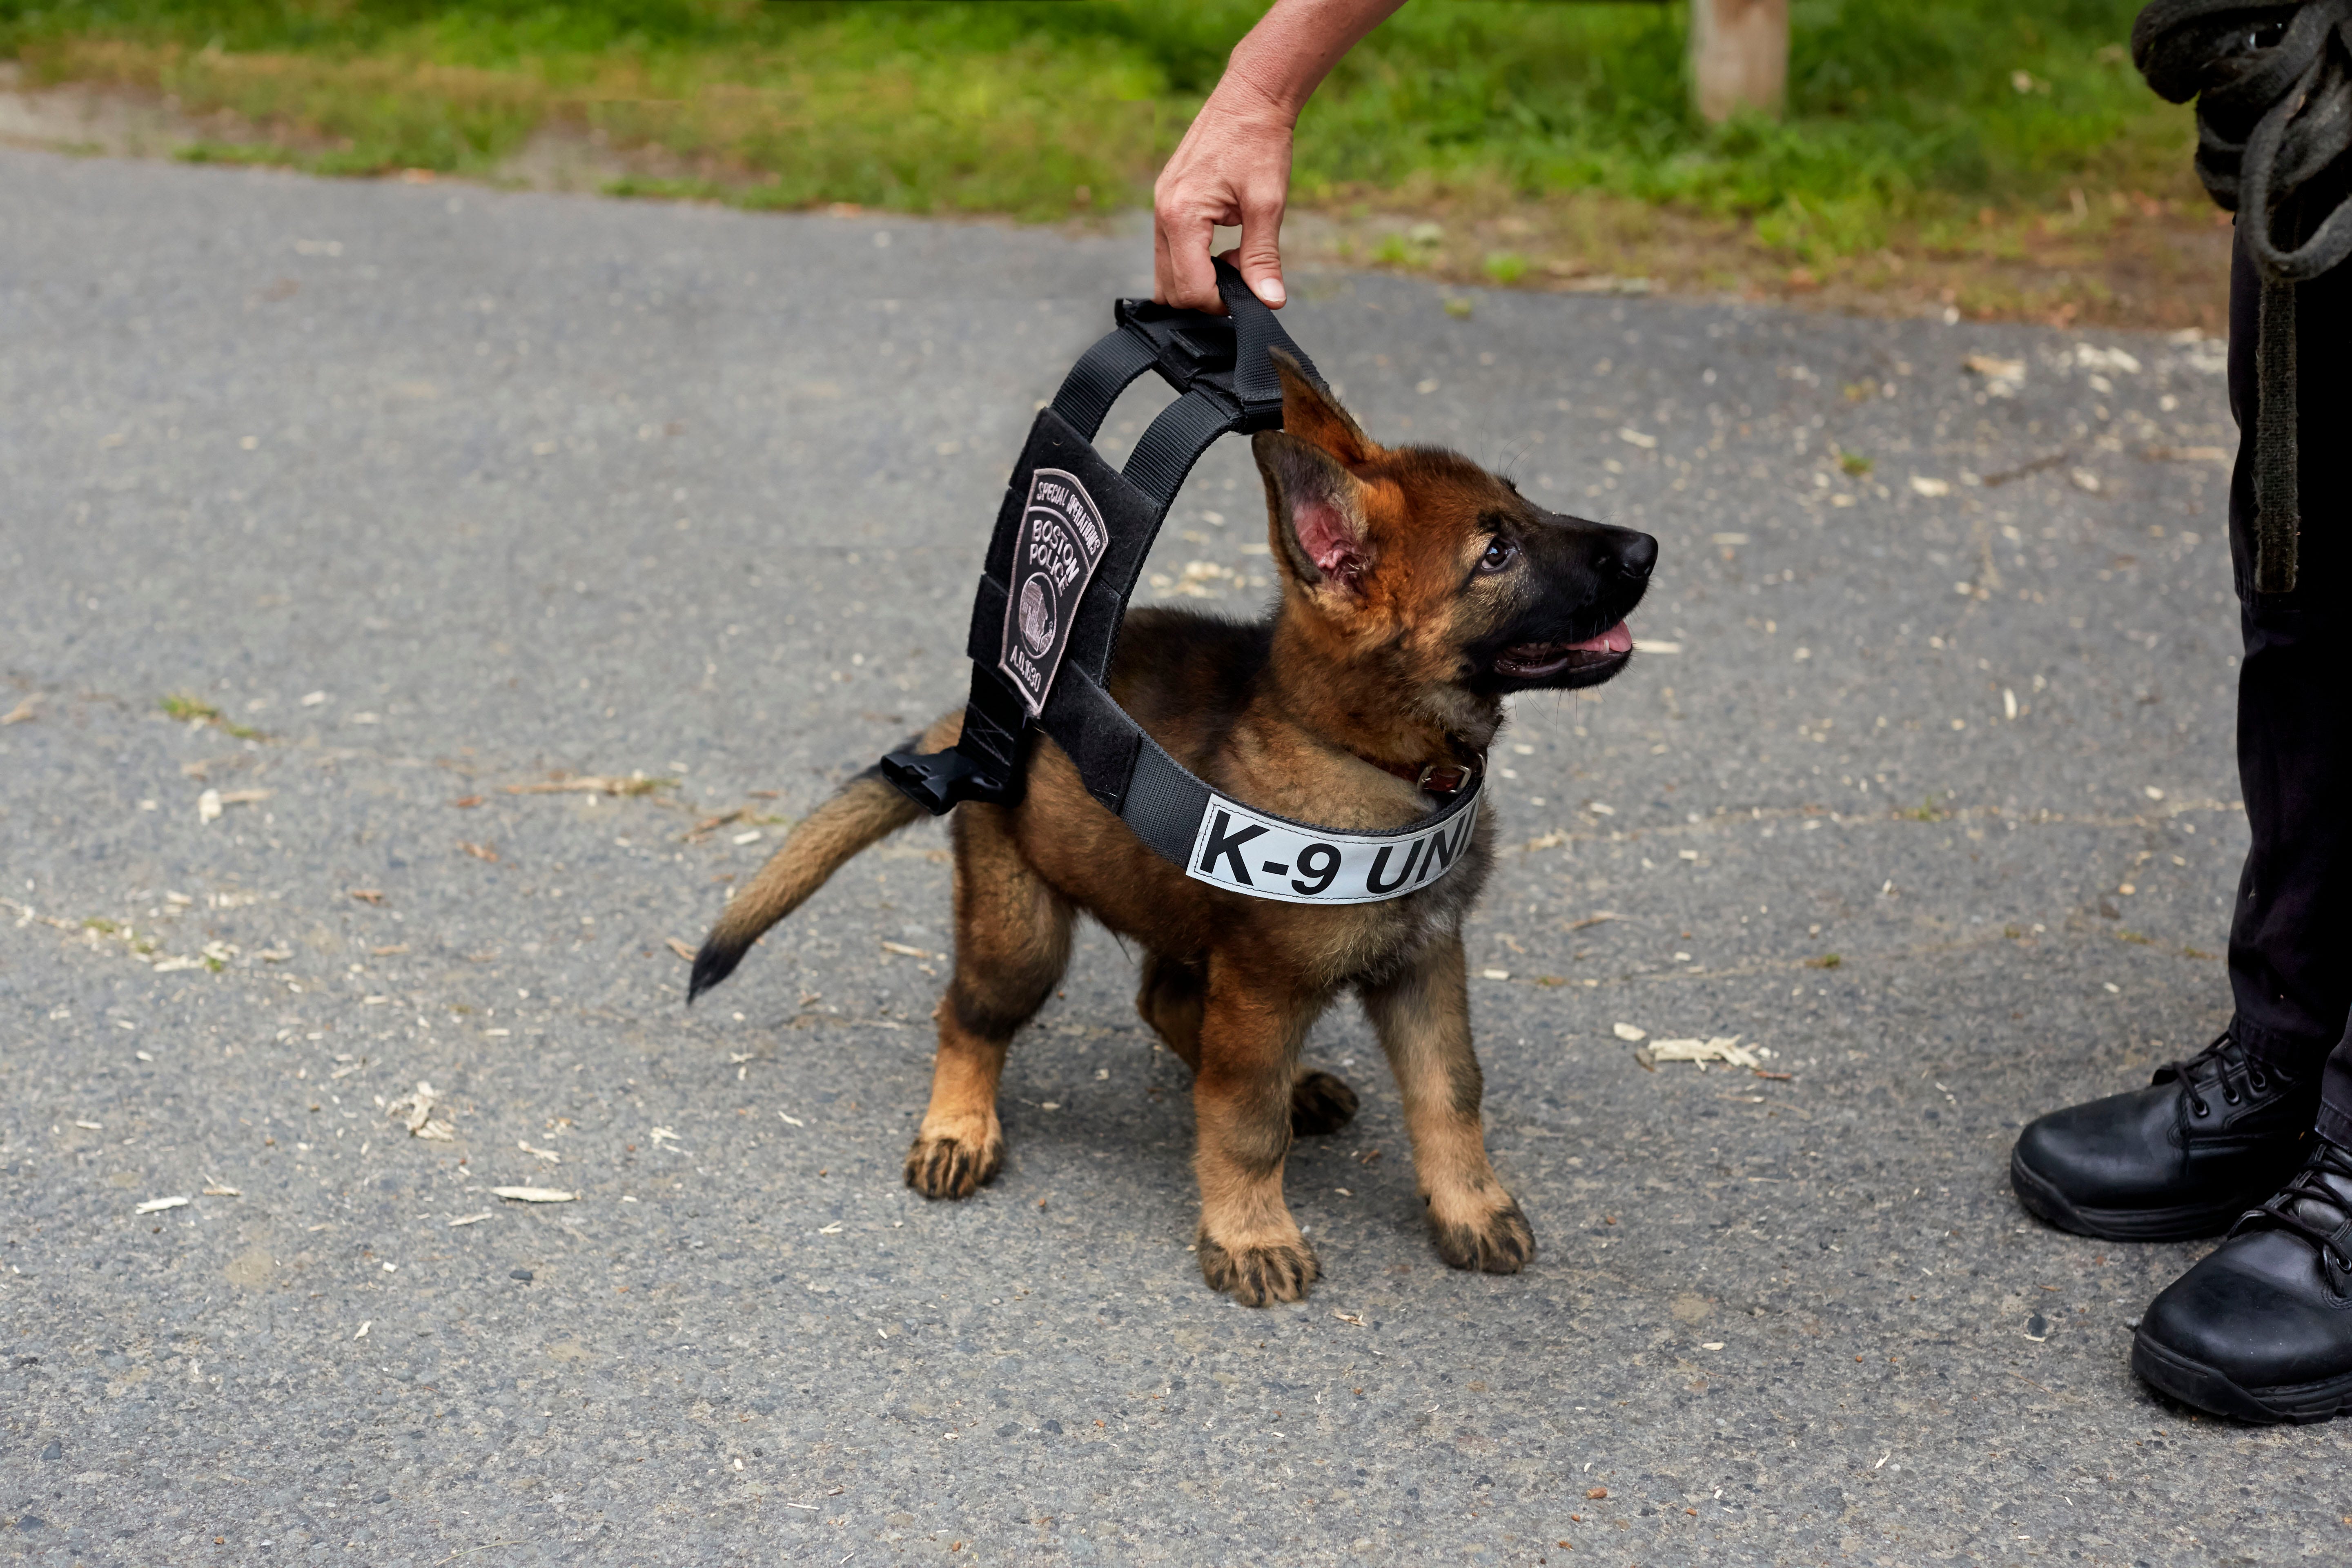 Viral photo of puppy in oversized K-9 